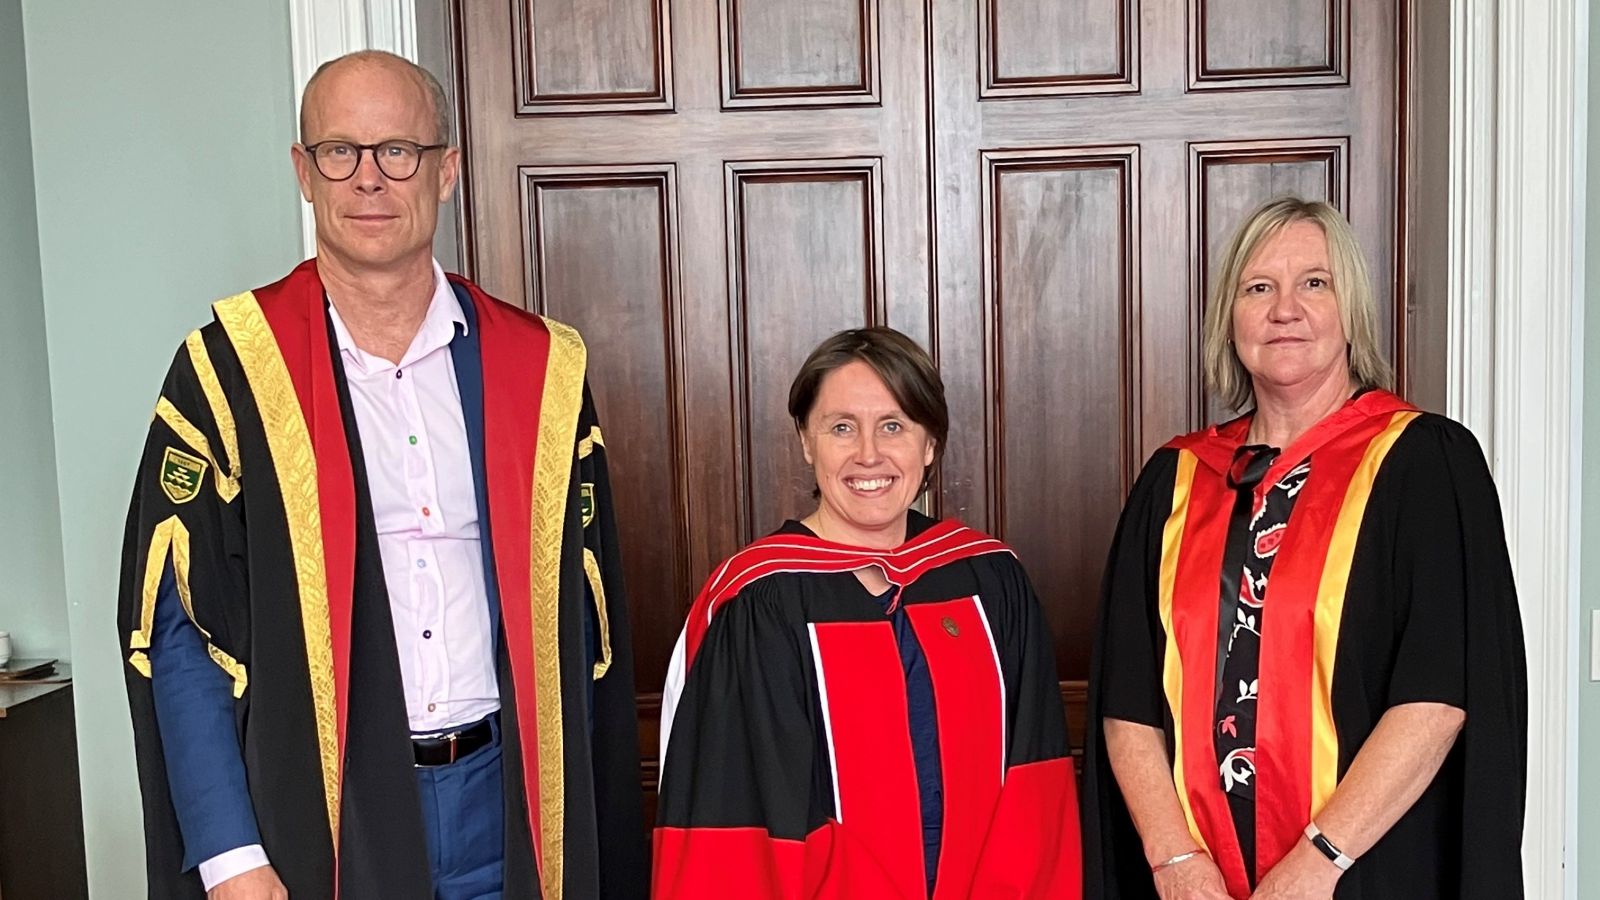  Nikki Hessell, flanked by Nic Smith and Sarah Leggott. All three are wearing academic robes and standing in front of a large wooden door.